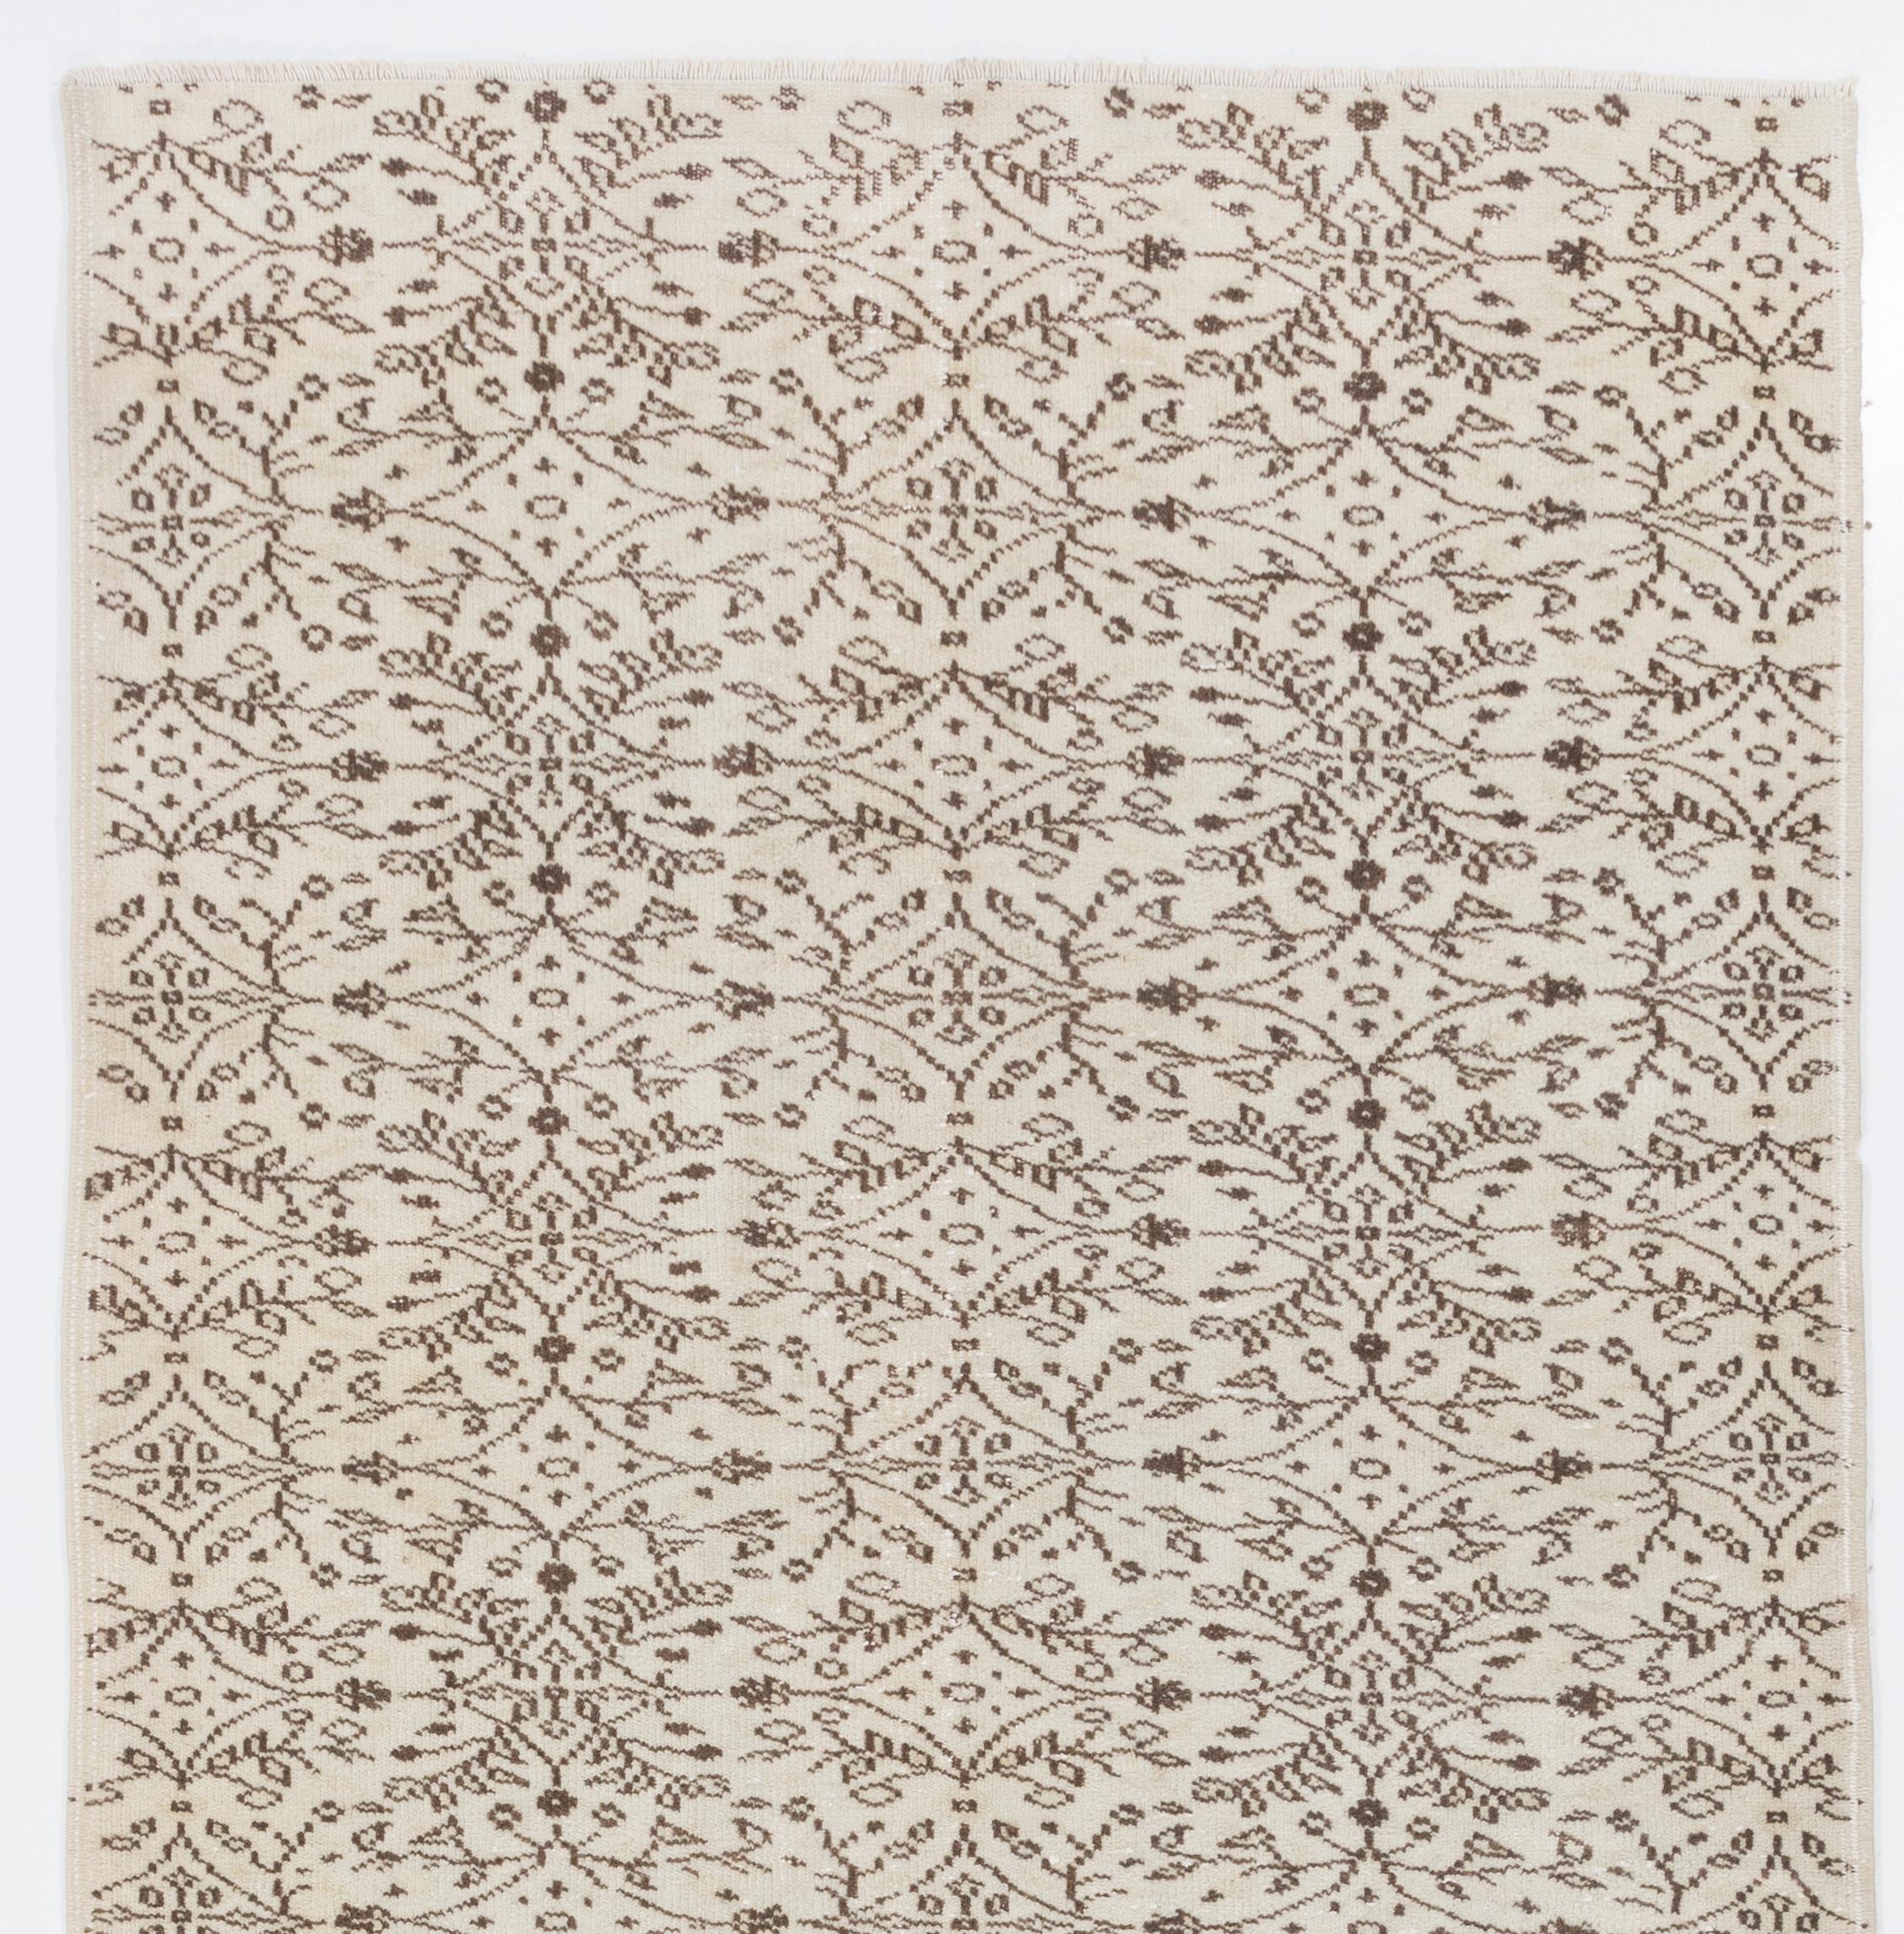 A vintage hand-knotted runner rug from central Turkey with an all-over design of dainty leafy vines around elongated diamond-shaped lattices in brown against an ivory background. It is finely hand-knotted with even medium wool pile on cotton